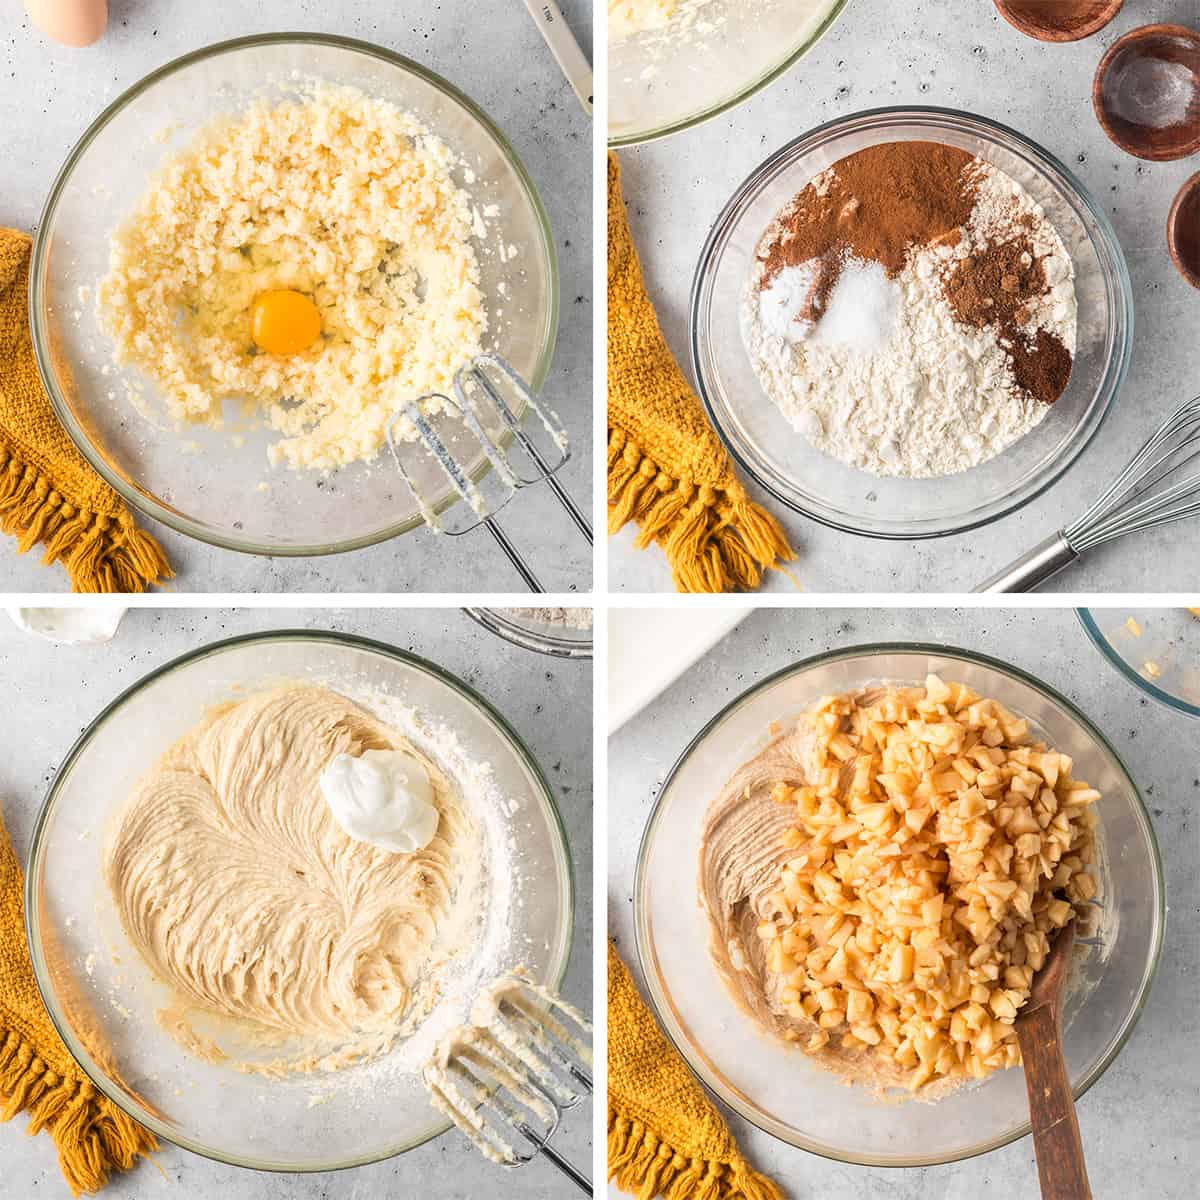 Four images of apple cake batter being combined in a glass mixing bowl.